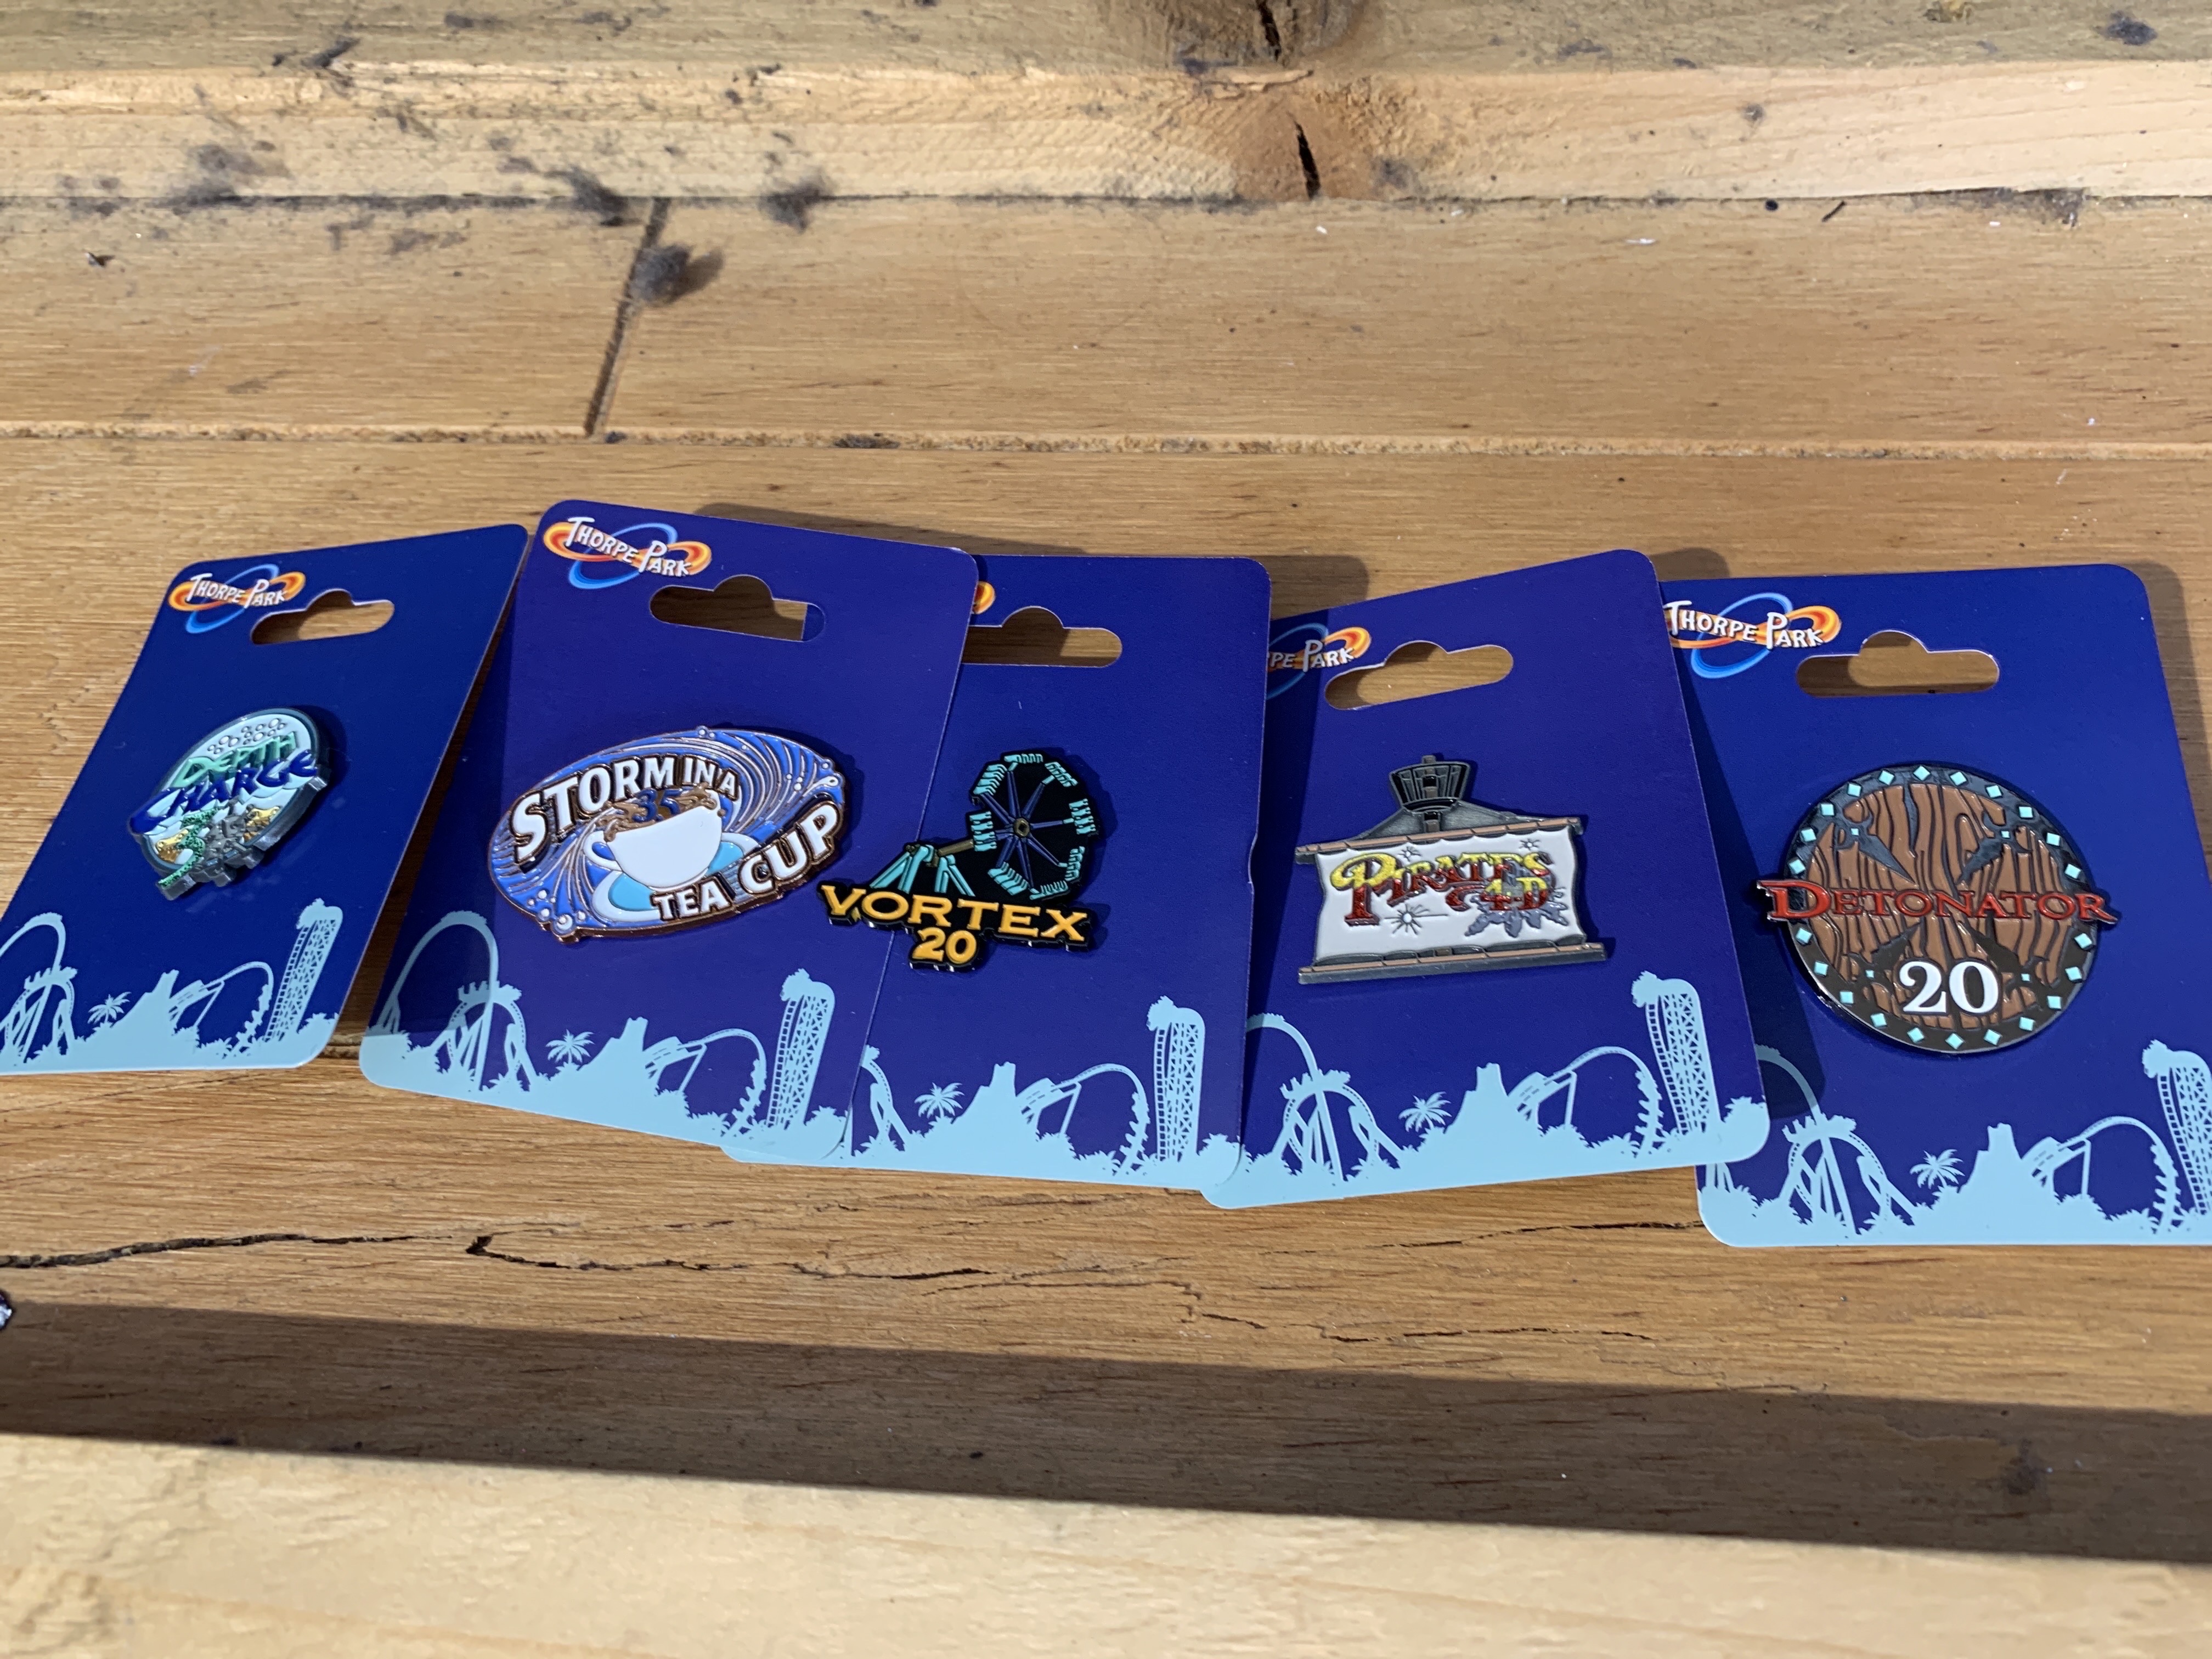 Thorpe Park 2021 Pin Badges Released